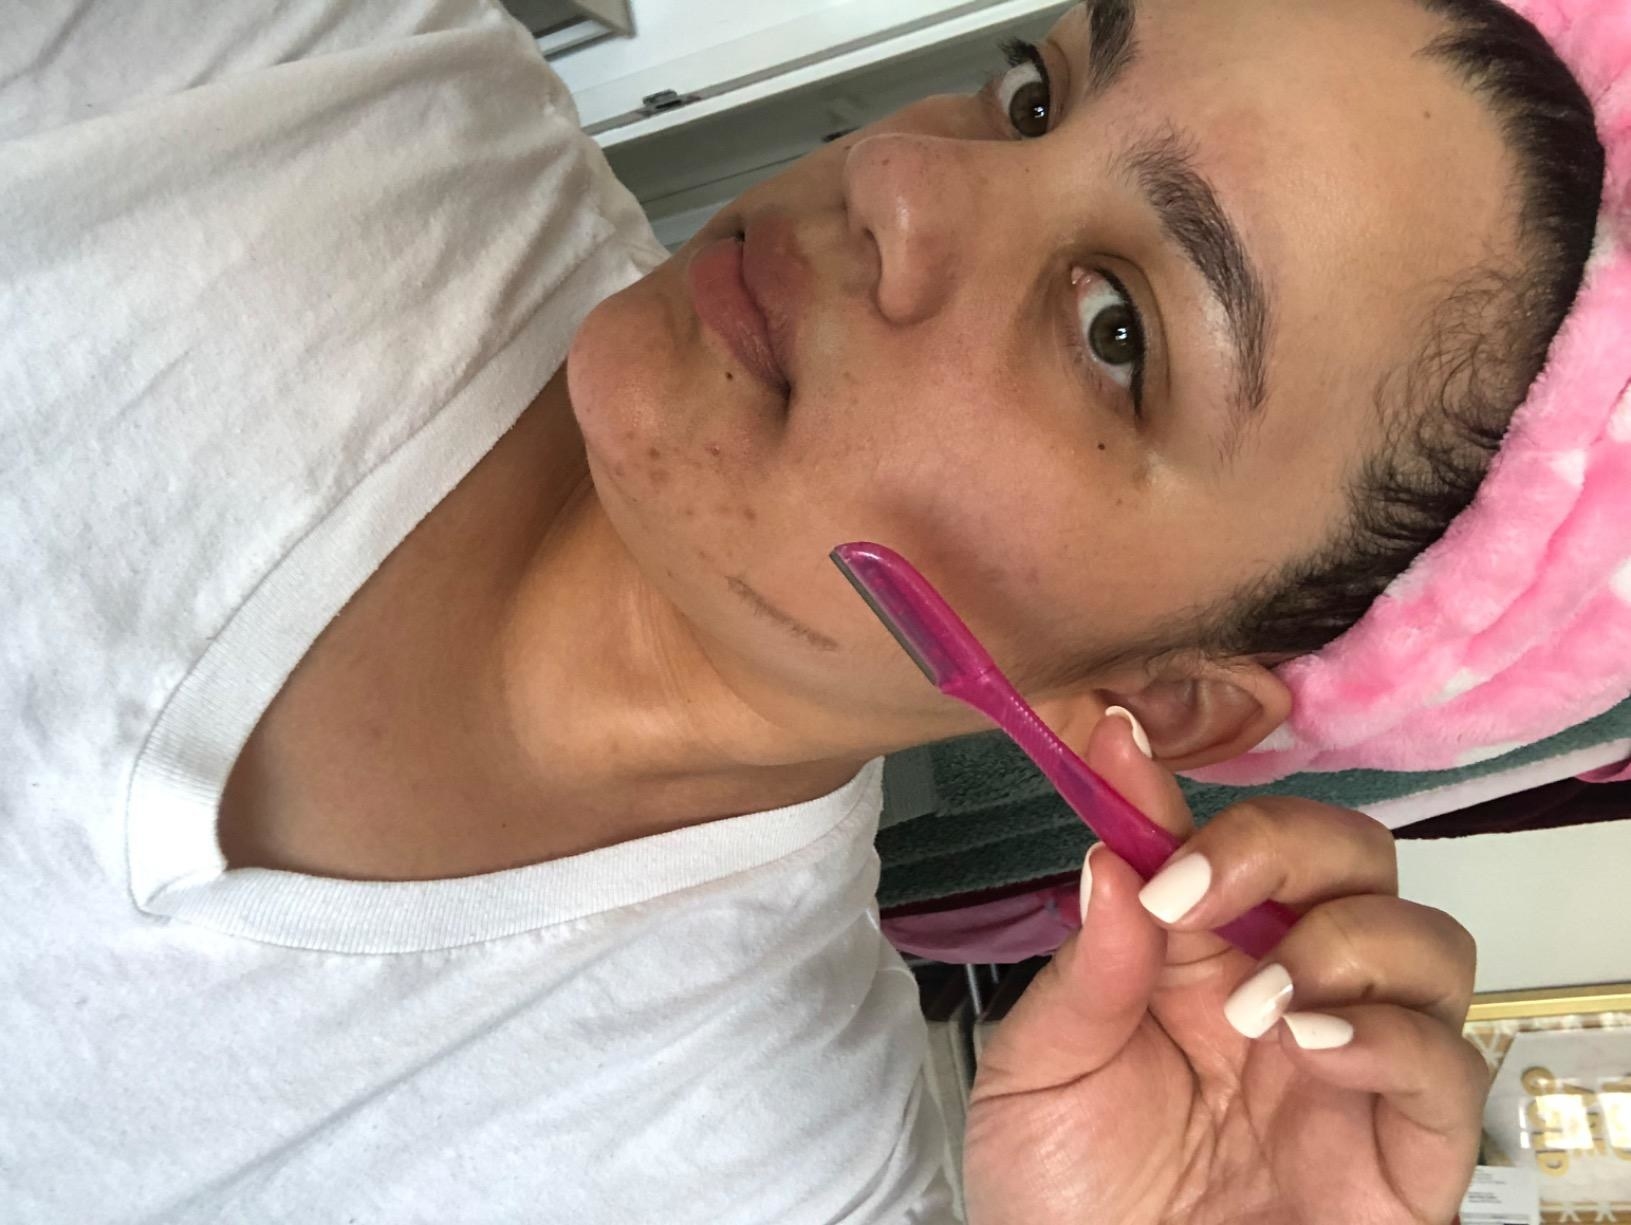 A reviewer&#x27;s holding a pink razor that they are about to use